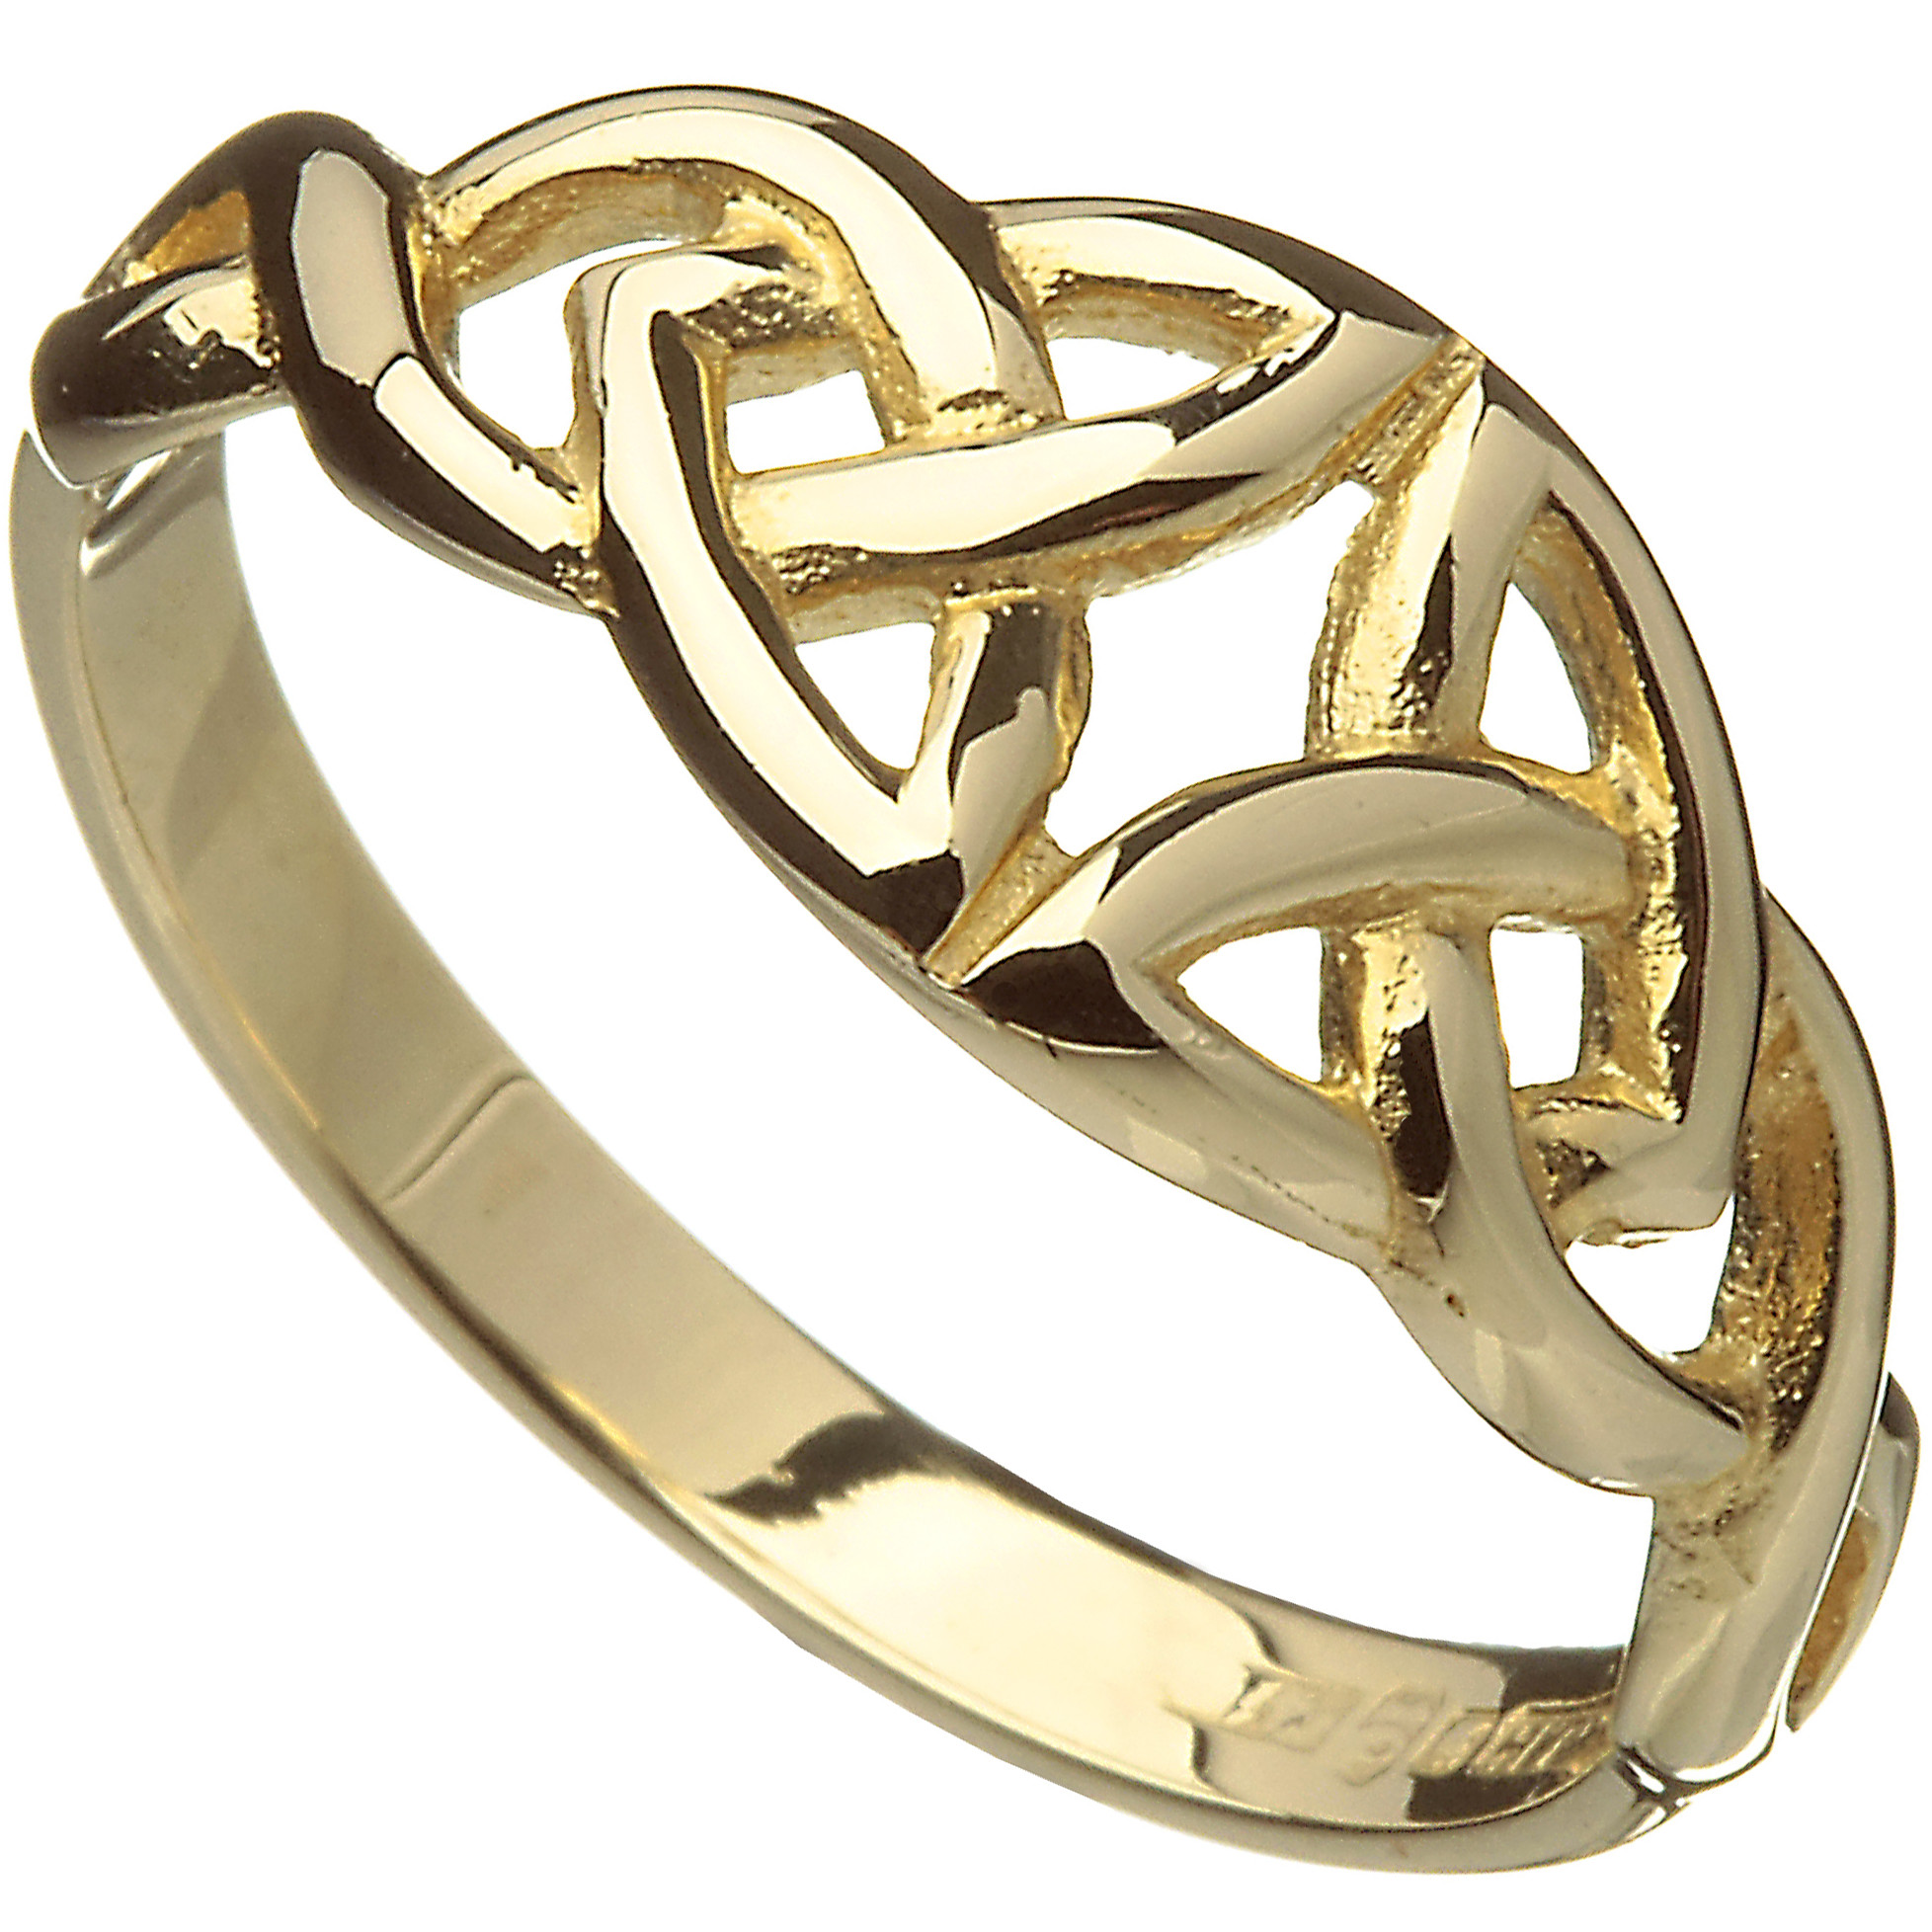 Ancient Gold: Irish Gifts from the Past